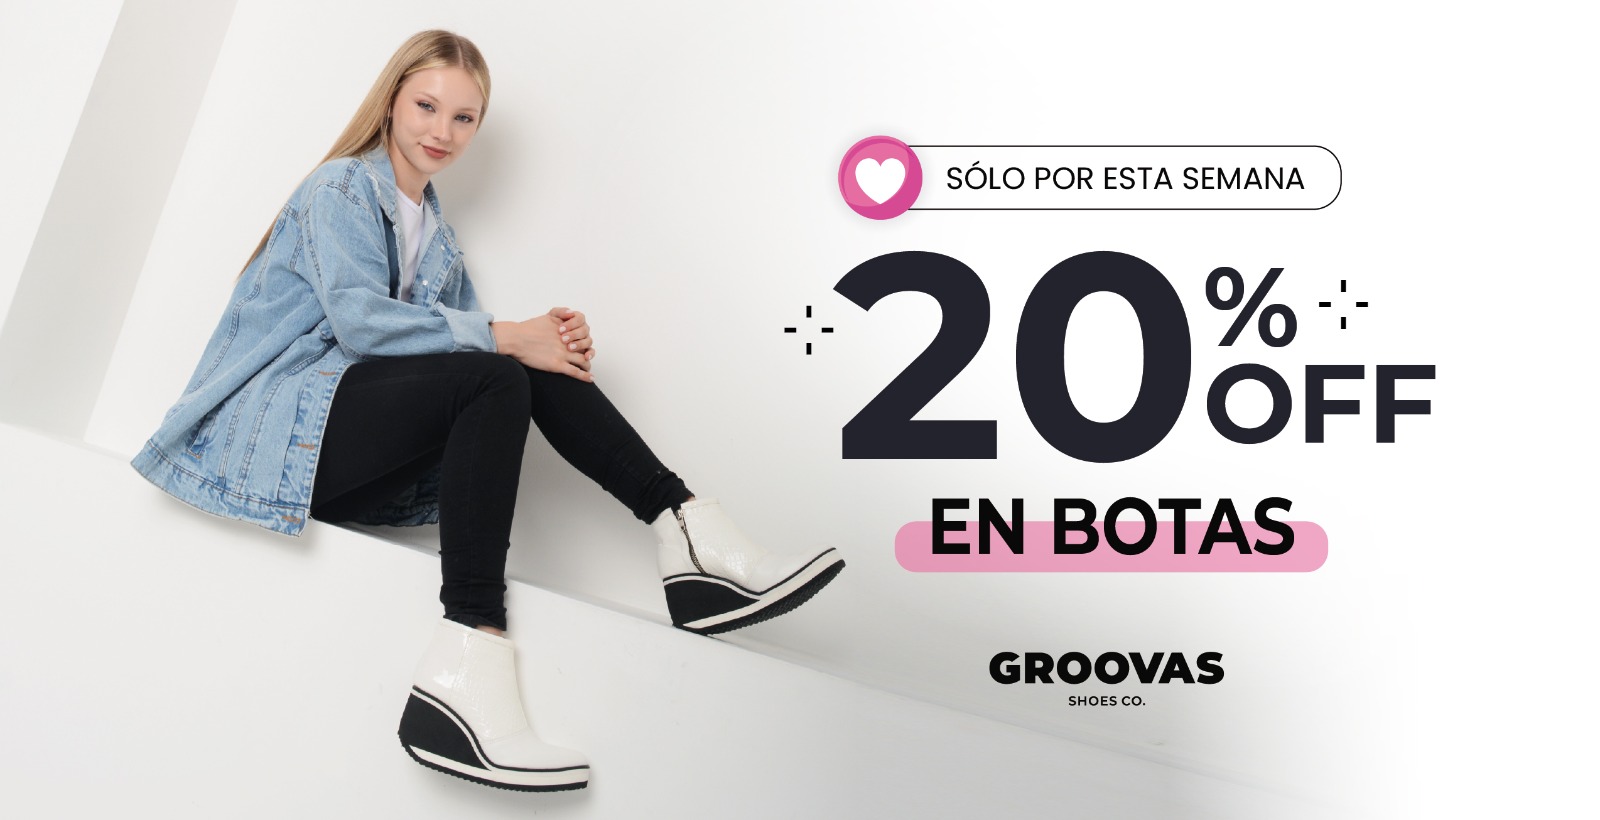 Groovas Shoes Co.